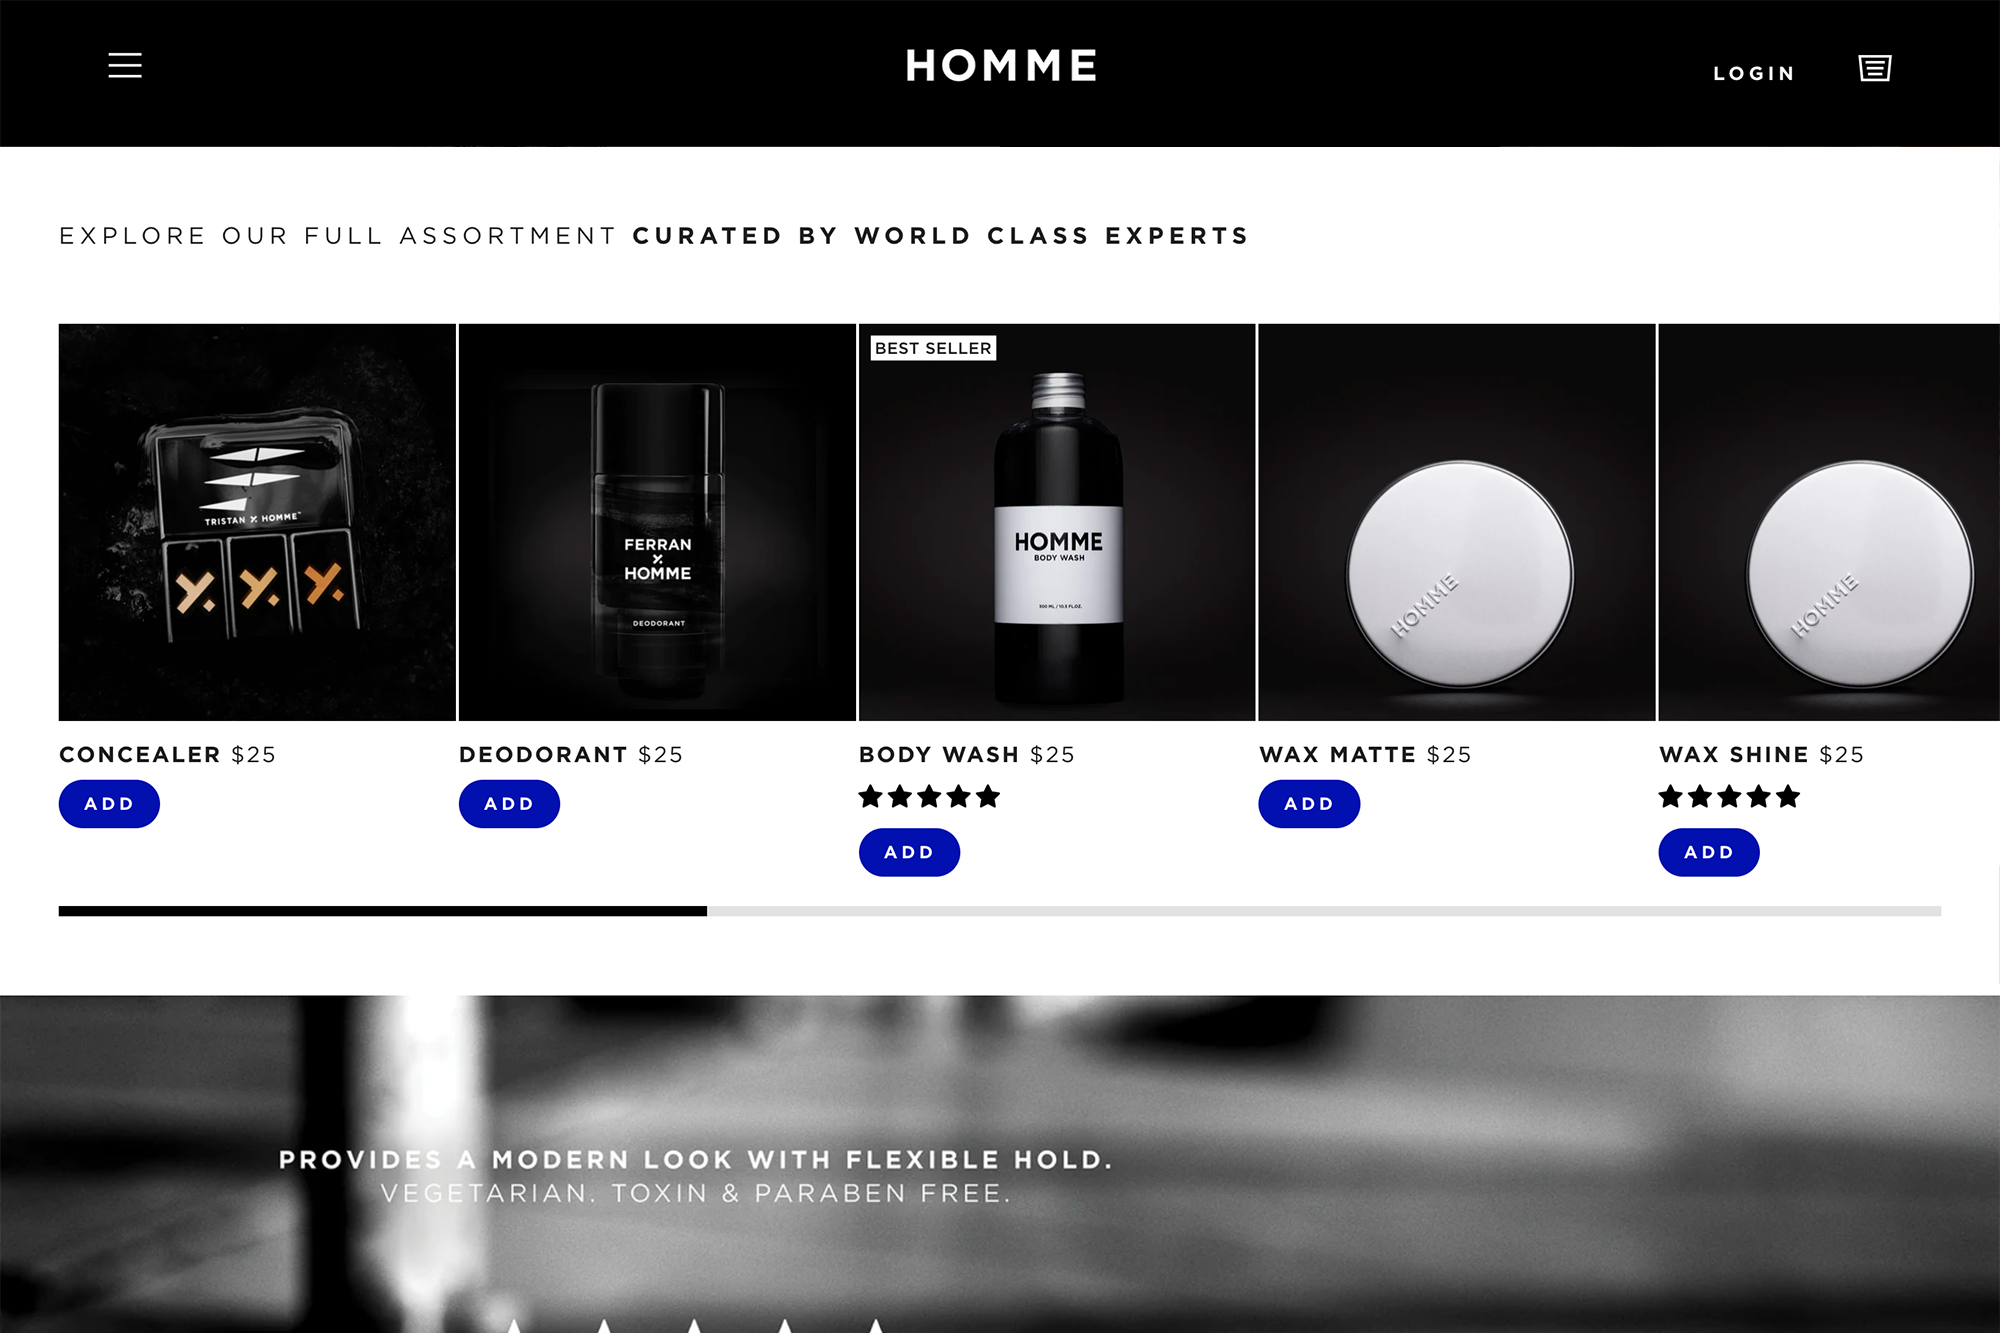 Homme homepage 01 3x2